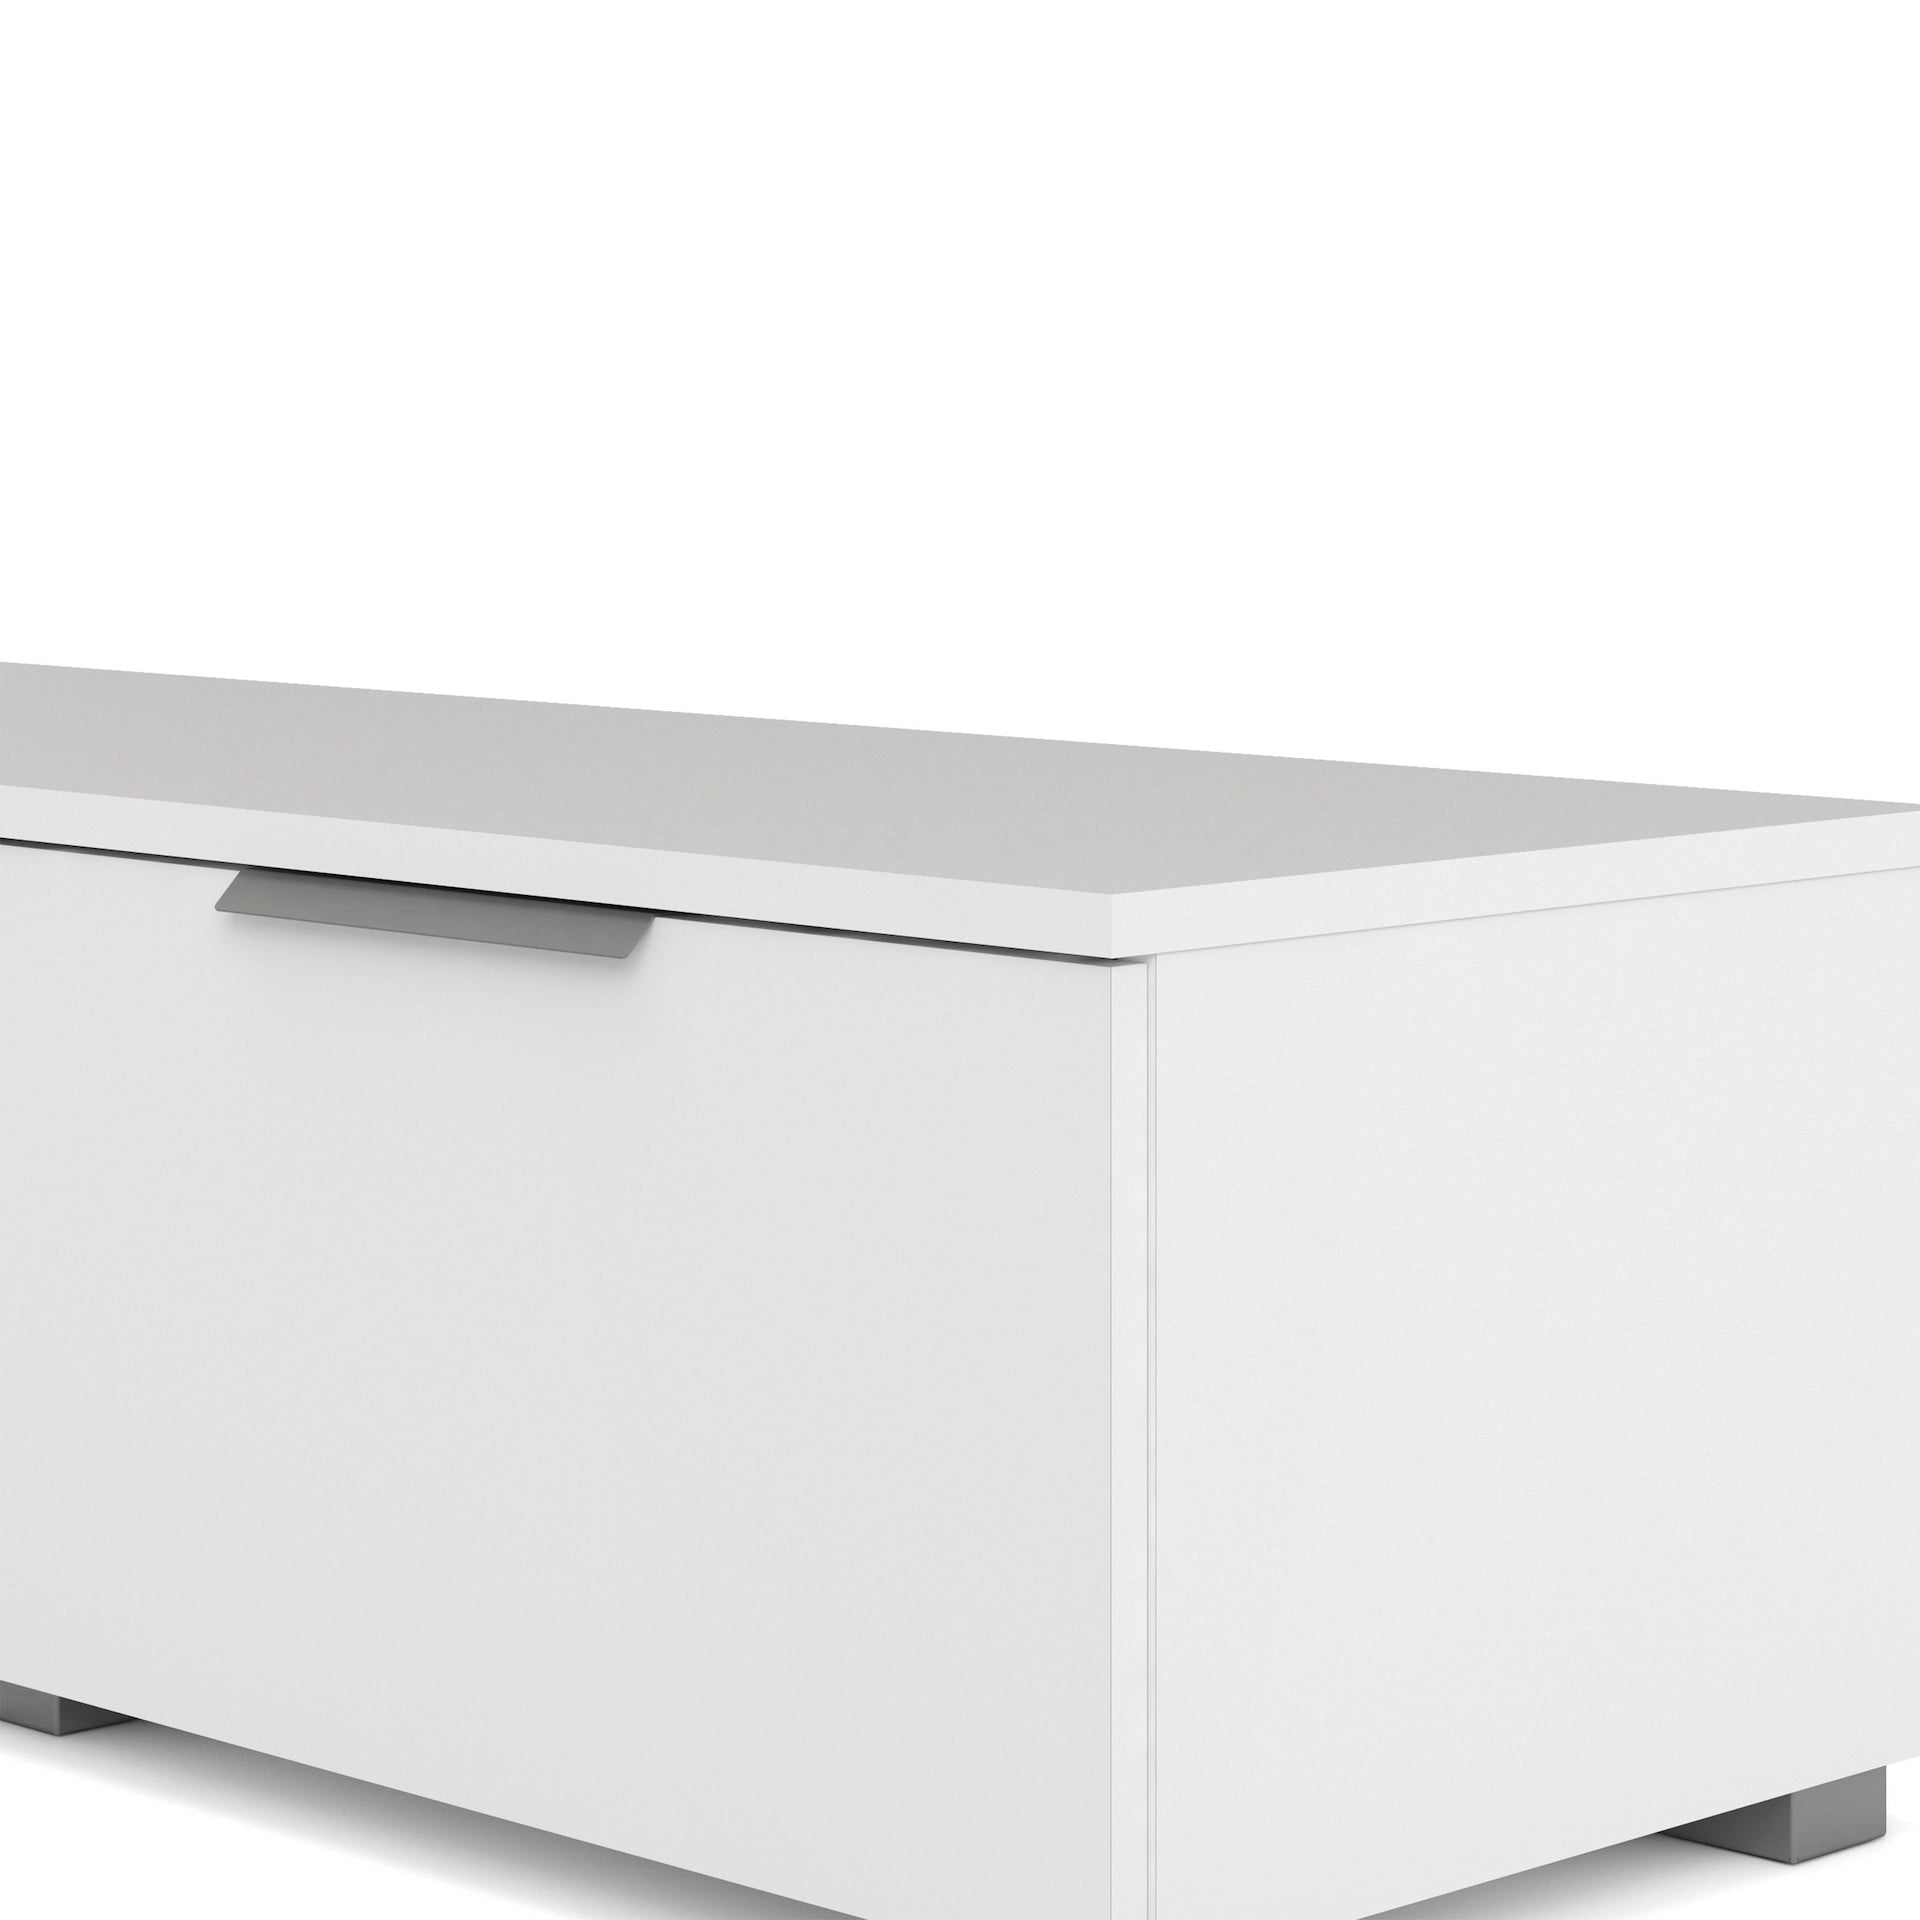 Furniture To Go Match TV Unit 2 Drawers 2 Shelf in White